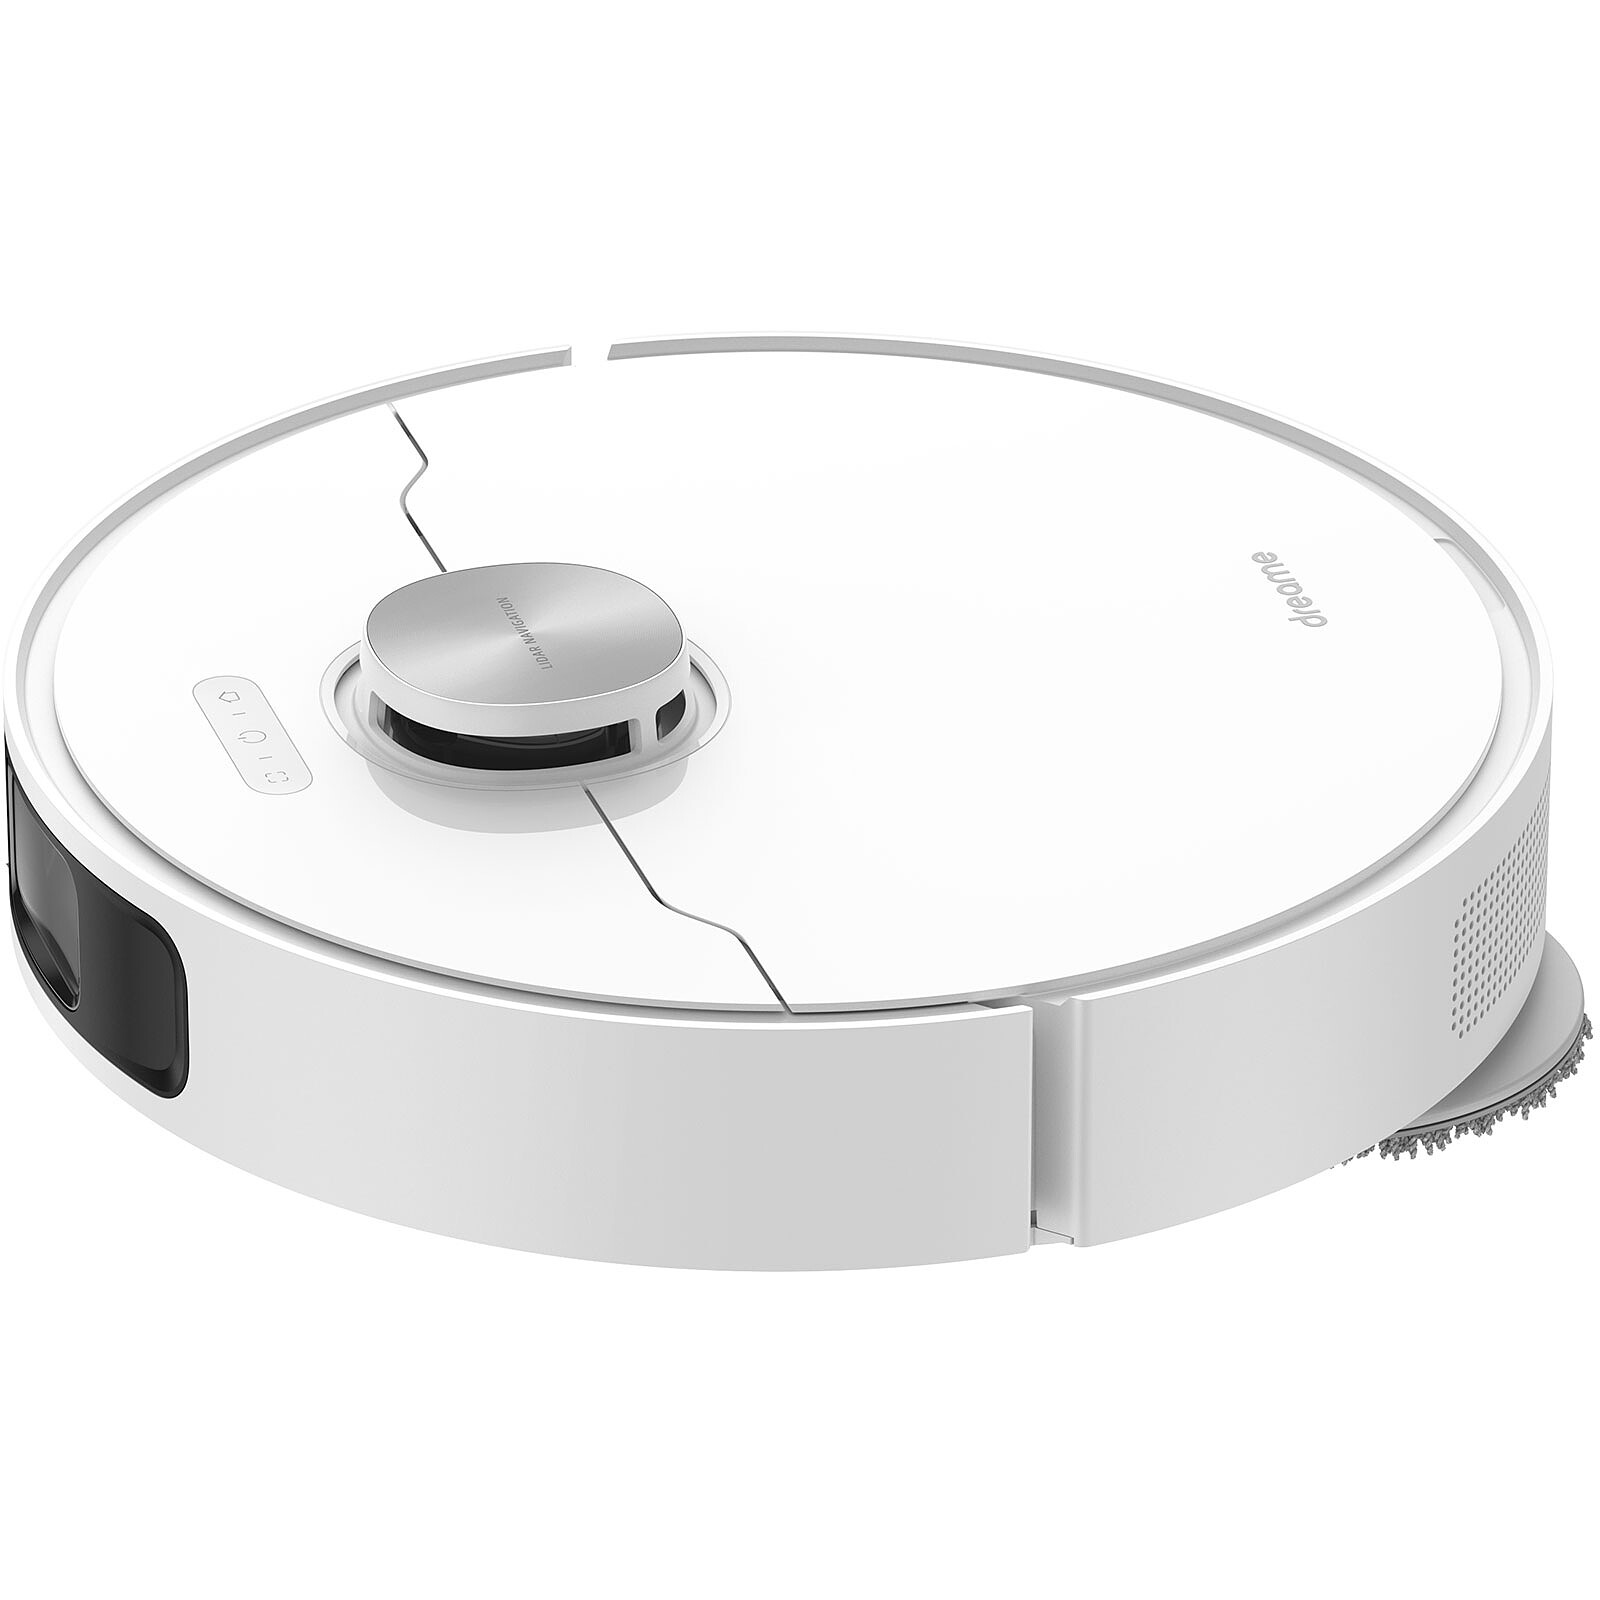 Dreame L10 Prime - Robot and vacuum cleaner - LDLC 3-year warranty